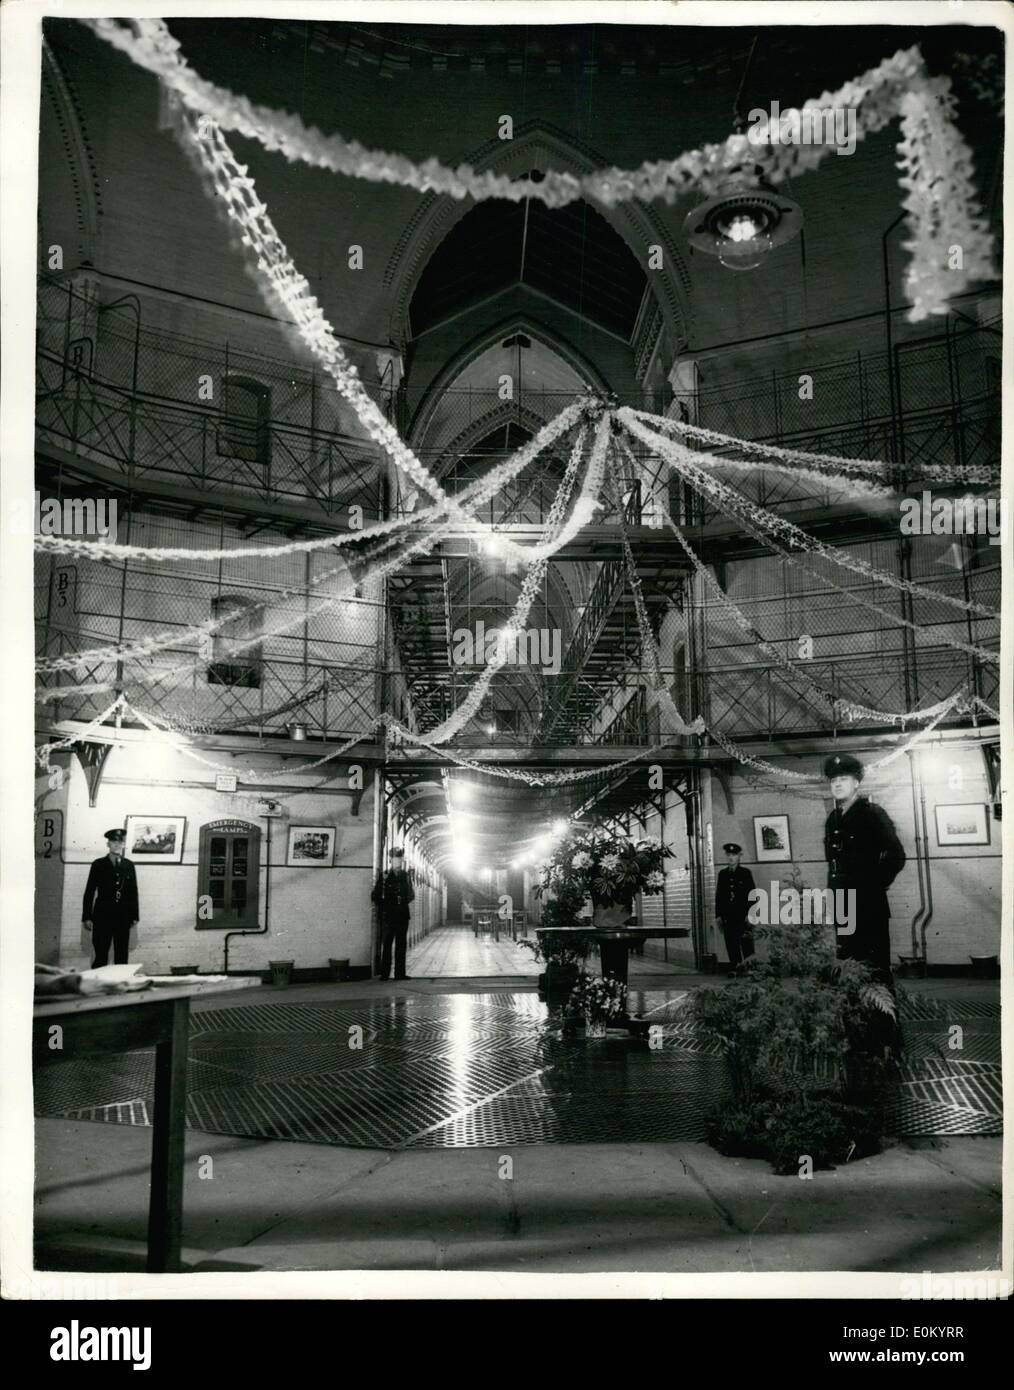 Dec. 12, 1952 - GILDED CAGE... DECORATIONS IN MANCHESTER PRISON FOR CAROL SERVICE... Officers of Strangeways Jail, Manchester had sections of the prison decorated with paper chains for the Carol service held there.. The service was held in the chapel and was attended by the Mayors of many towns including Manchester and Sheffield.. Keystone Photo Shows:- Paper chains hanging from the roof - the centre portion of the prison - during the carol service which was held in the prison. Stock Photo